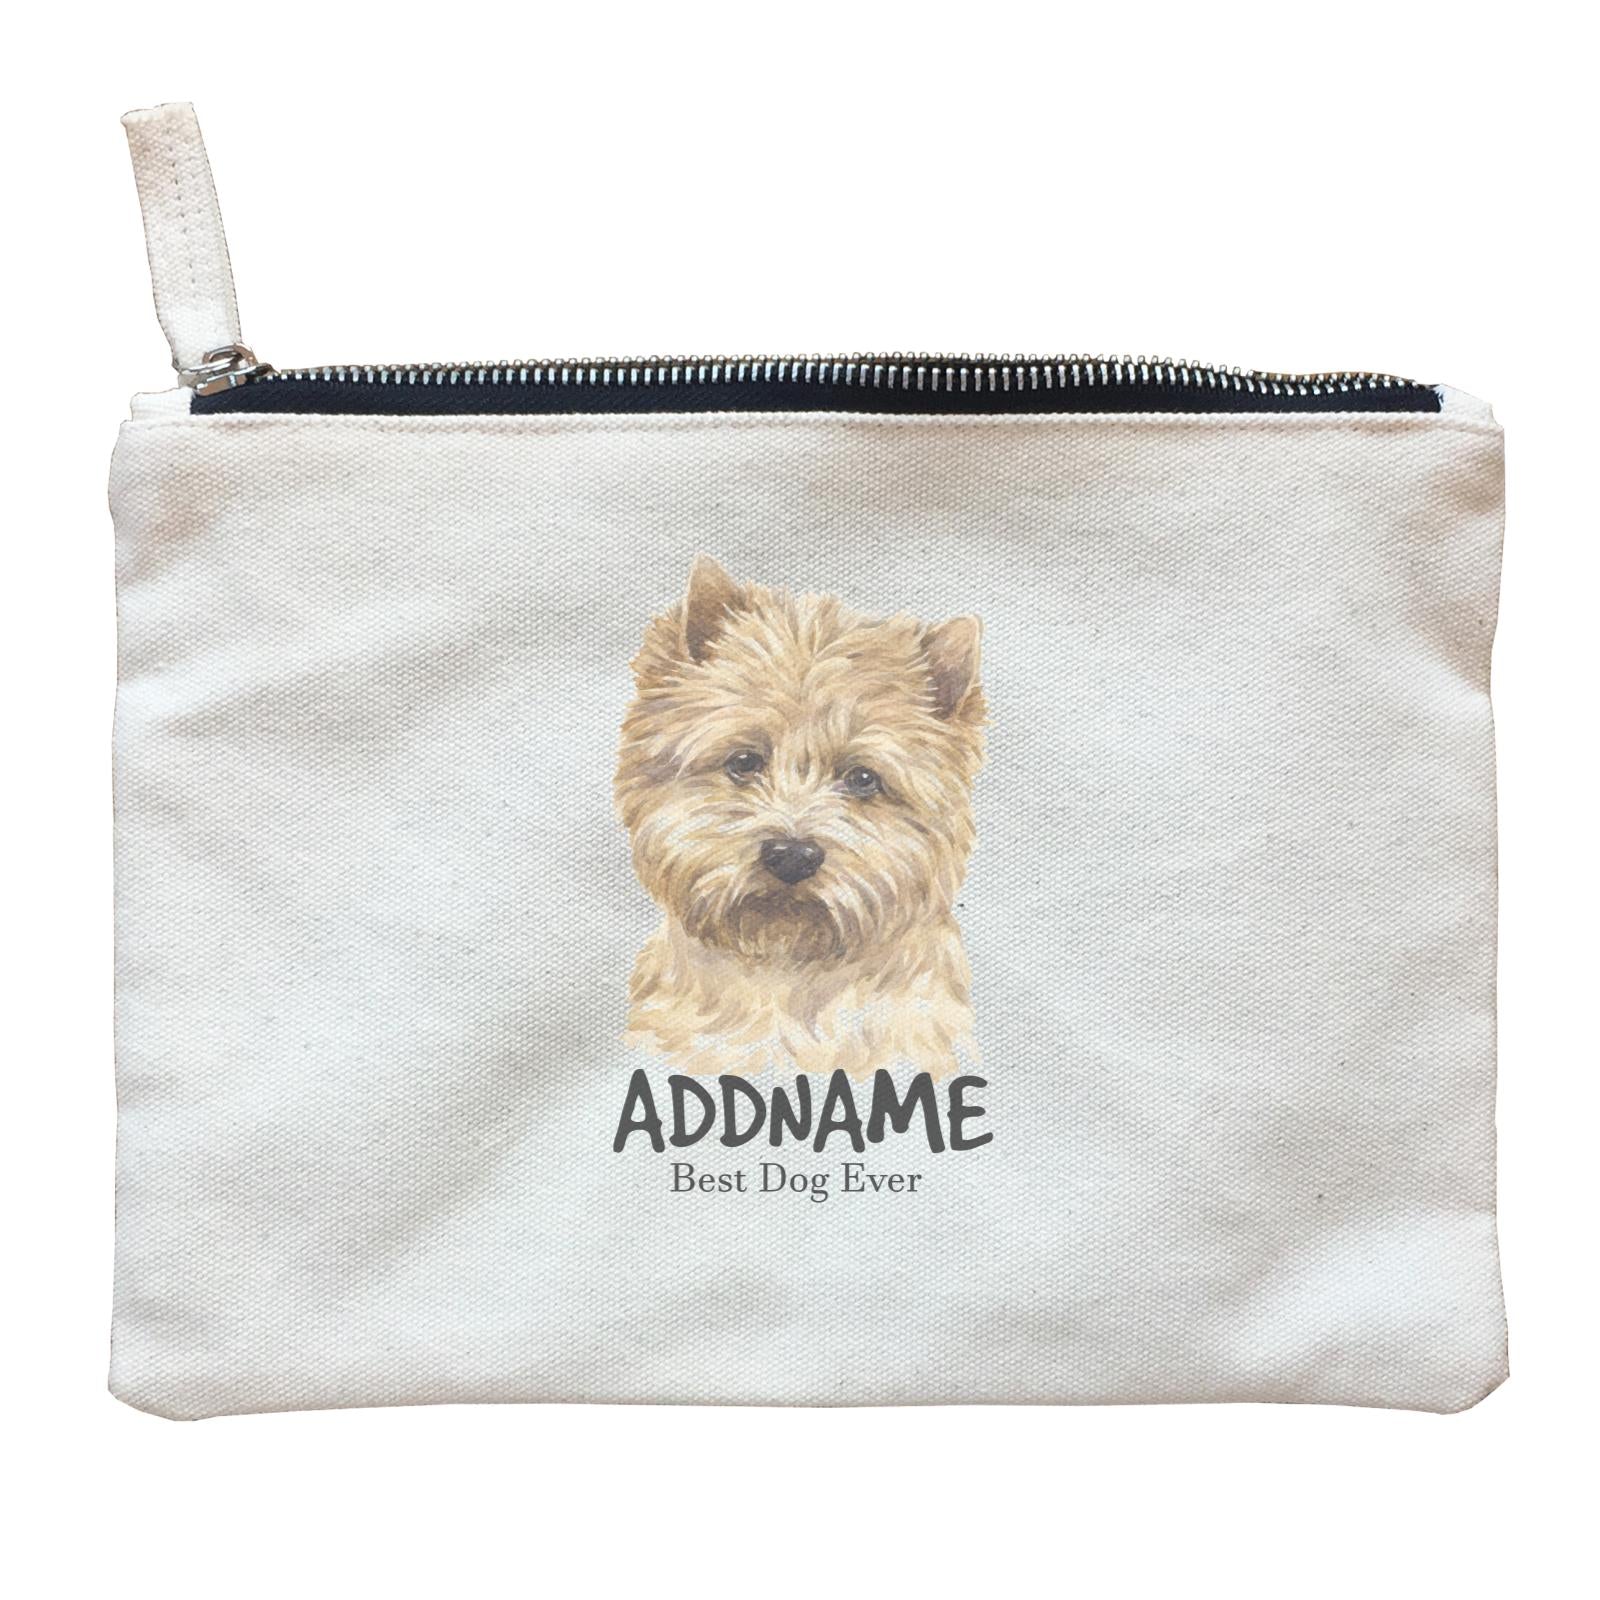 Watercolor Dog Cairn Terrier Best Dog Ever Addname Zipper Pouch